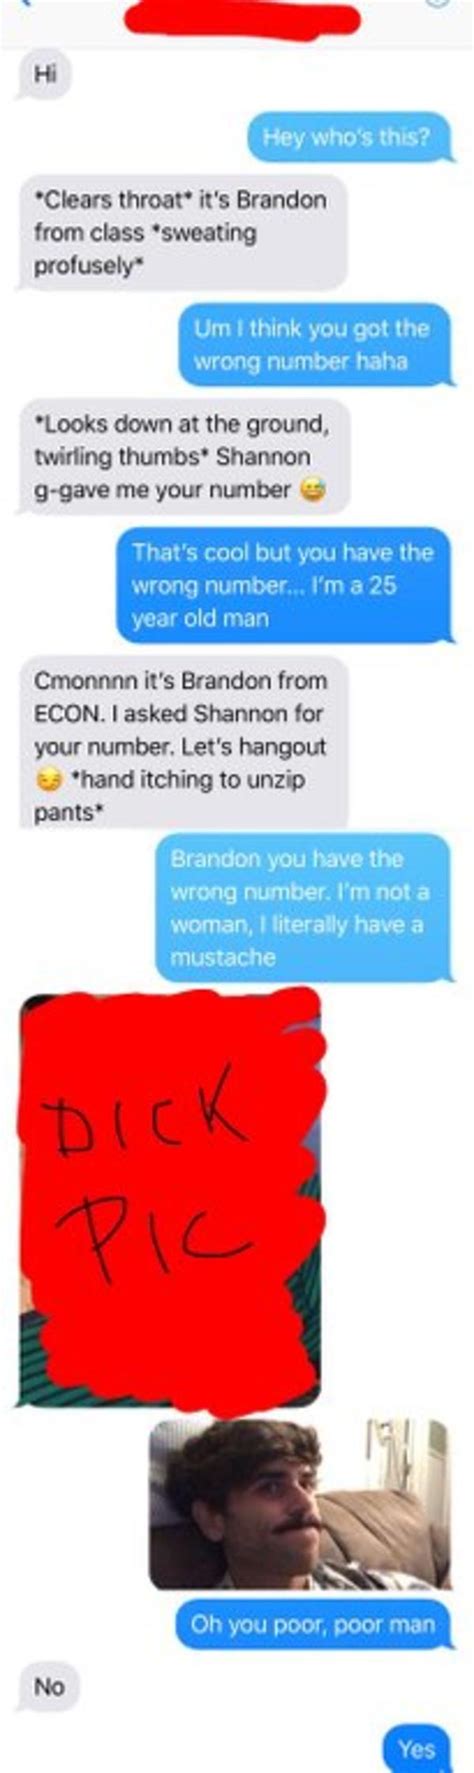 Dick Pic Creepy Asterisks Know Your Meme